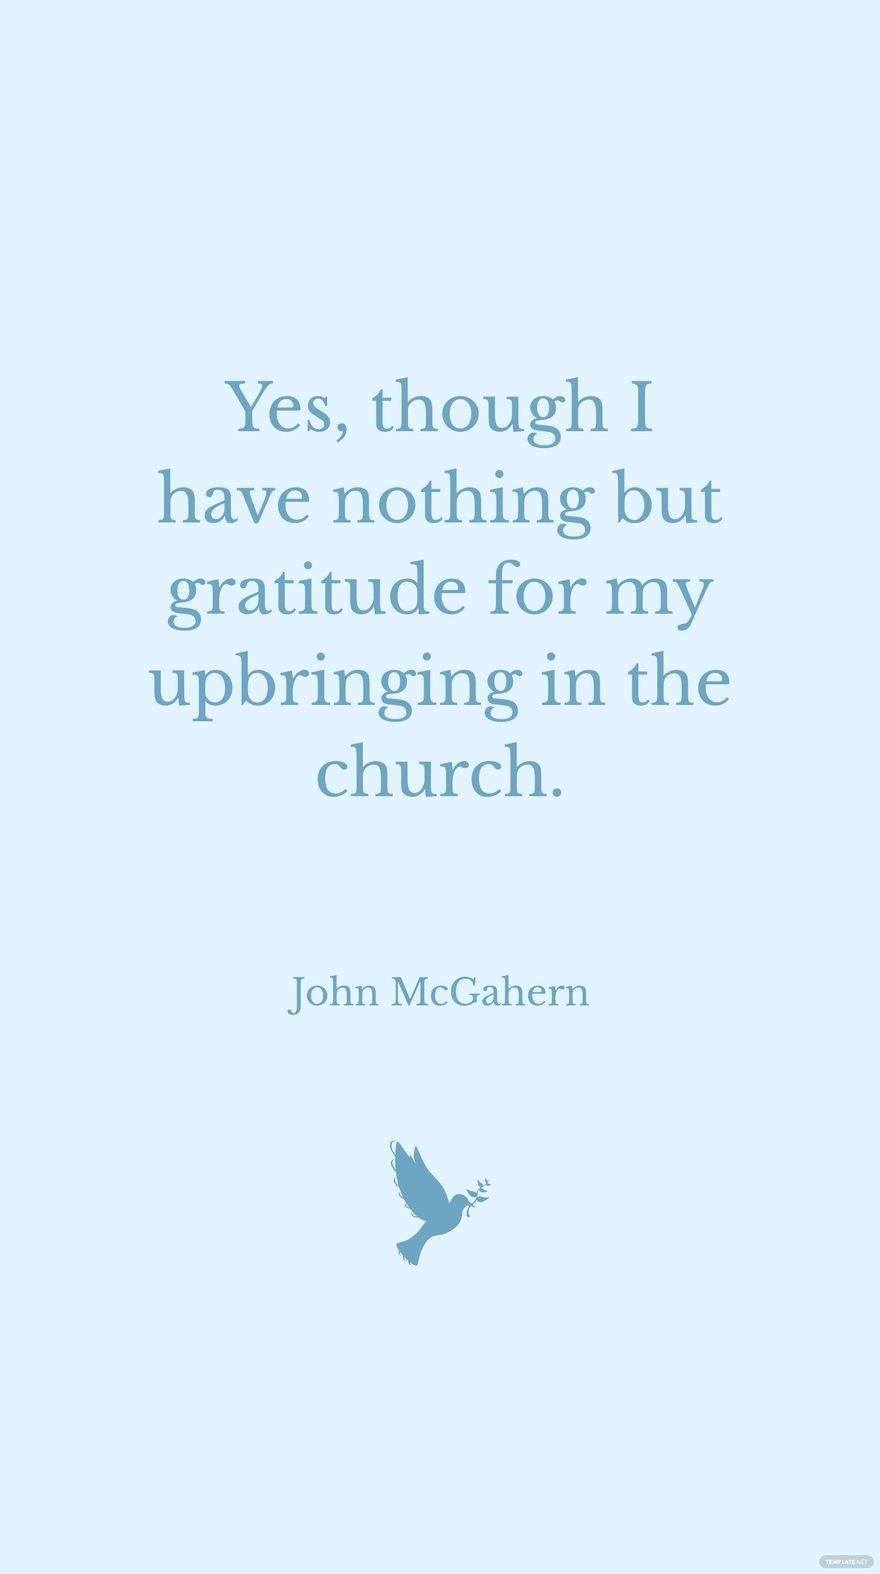 John McGahern - Yes, though I have nothing but gratitude for my upbringing in the church. in JPG